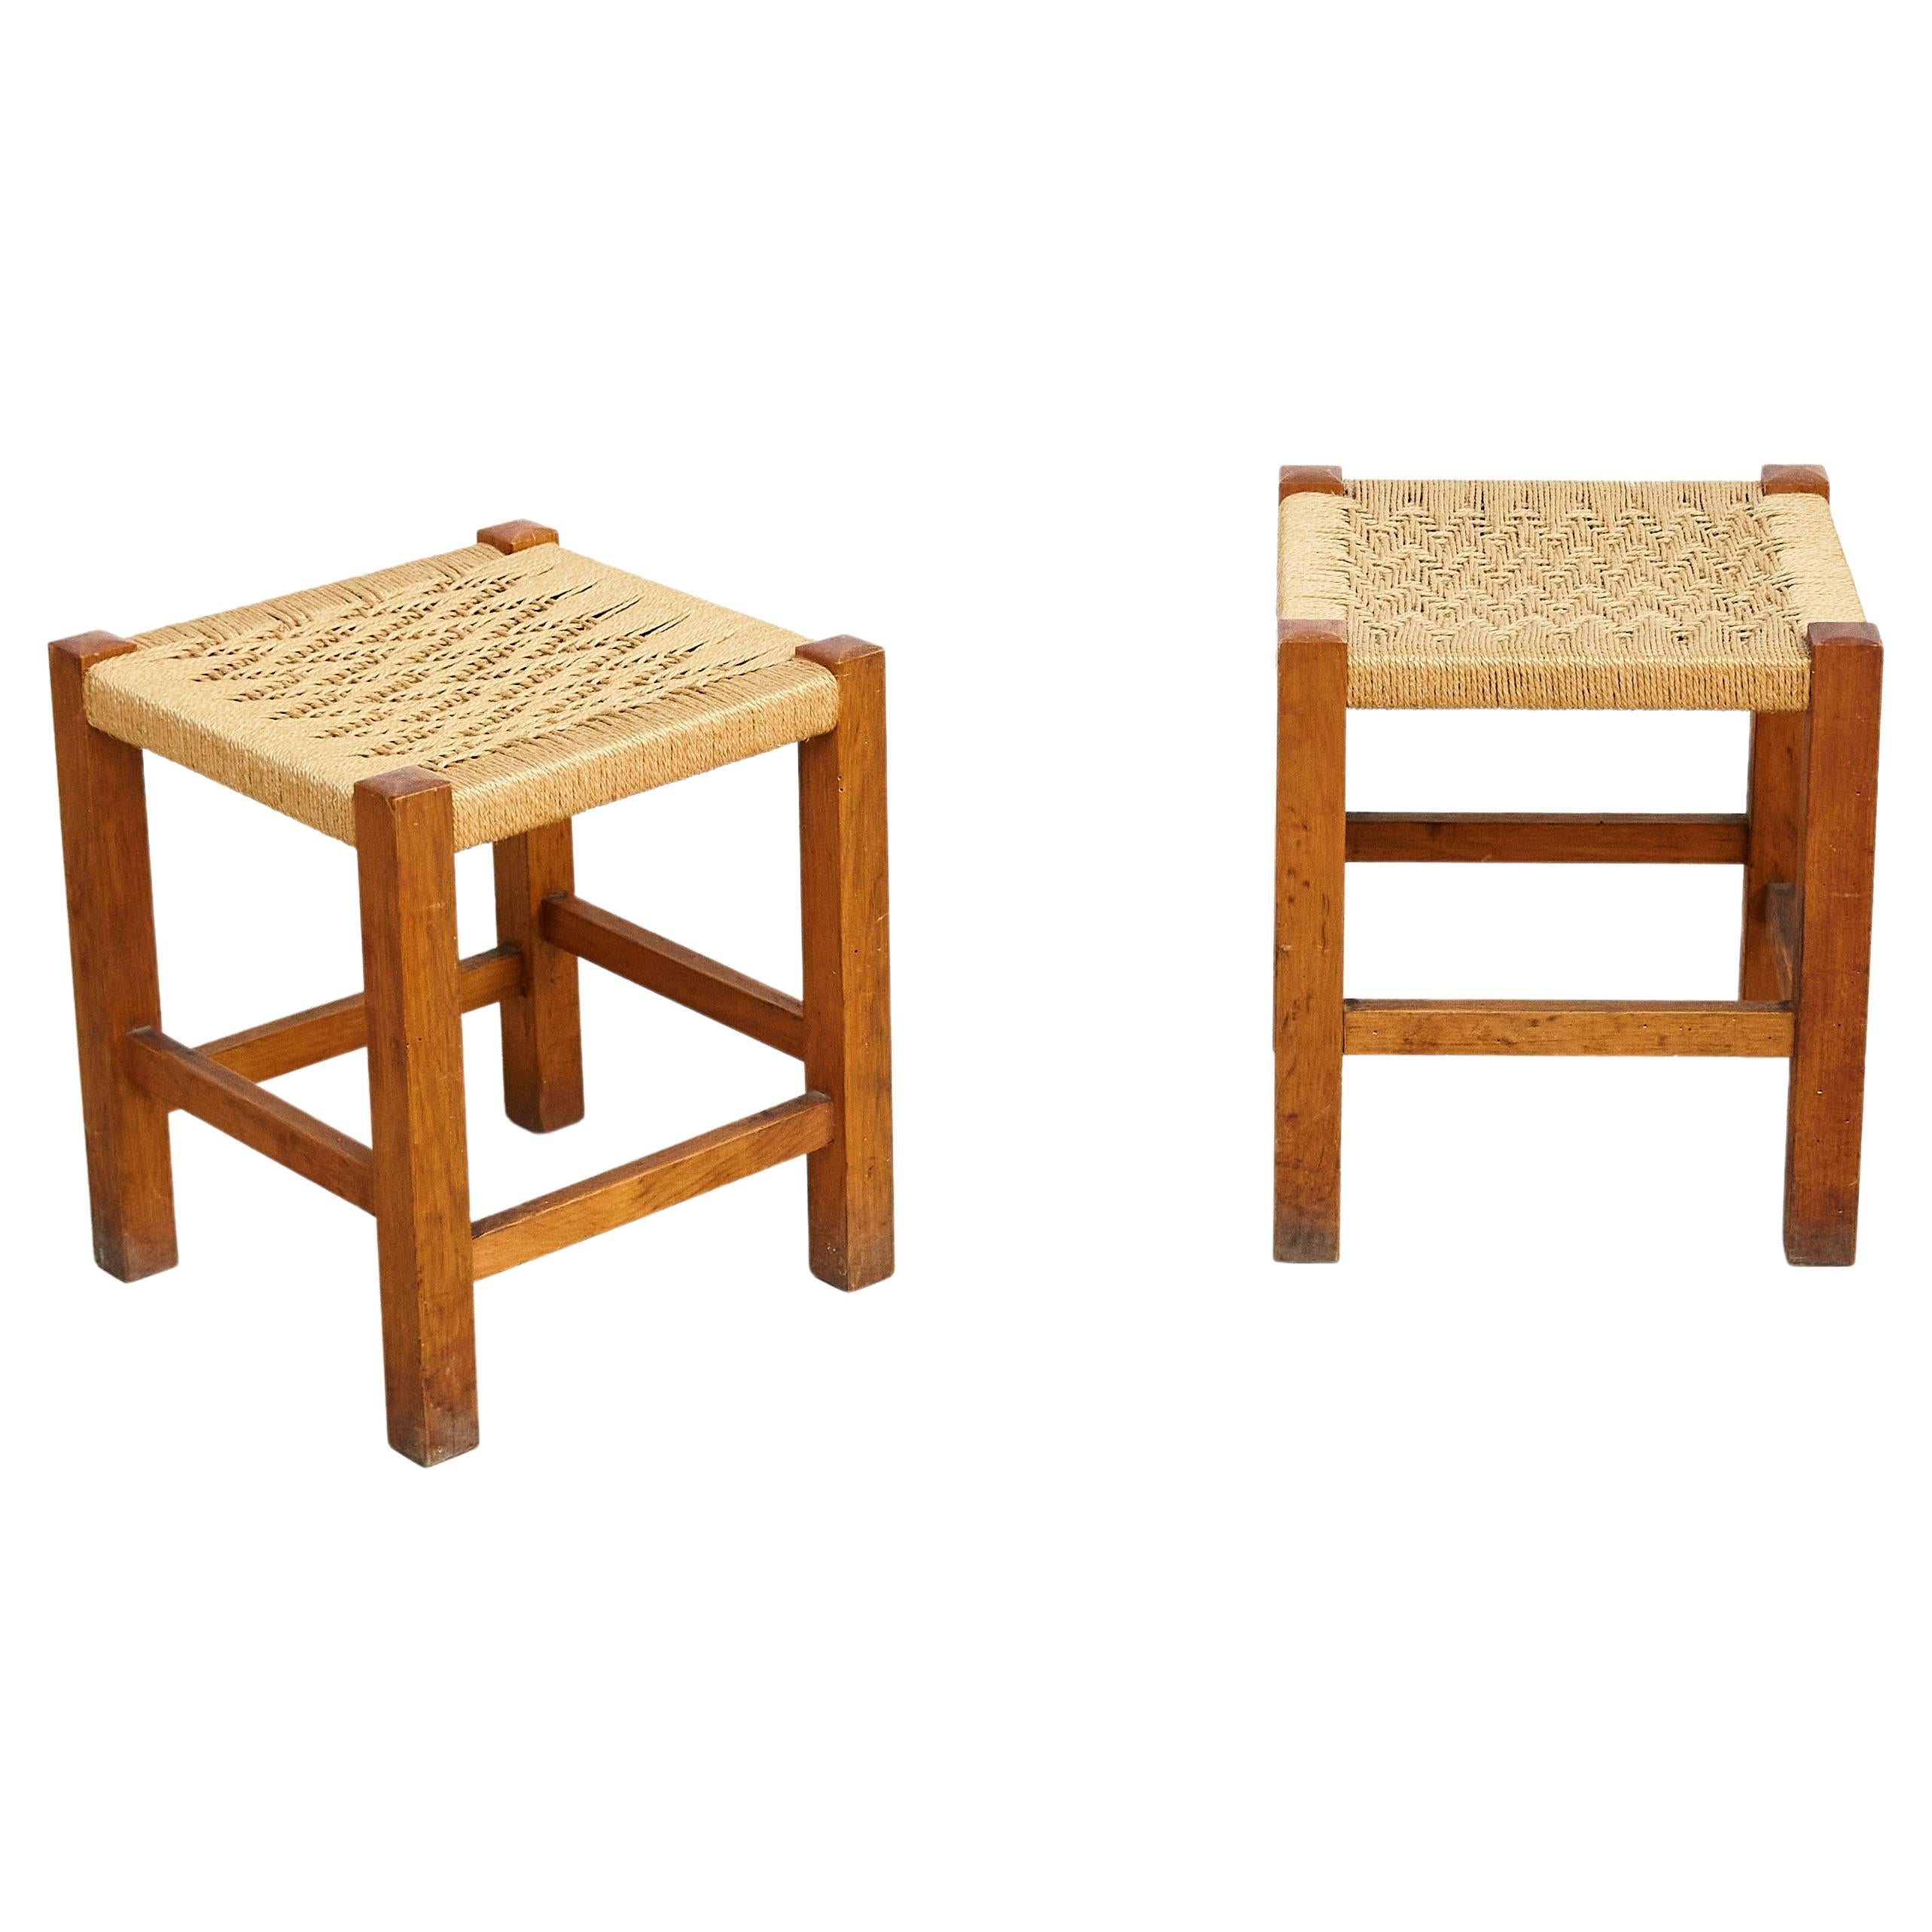 Pair of Mid-Century Modern Wood and Rattan French Stools, circa 1960 For Sale